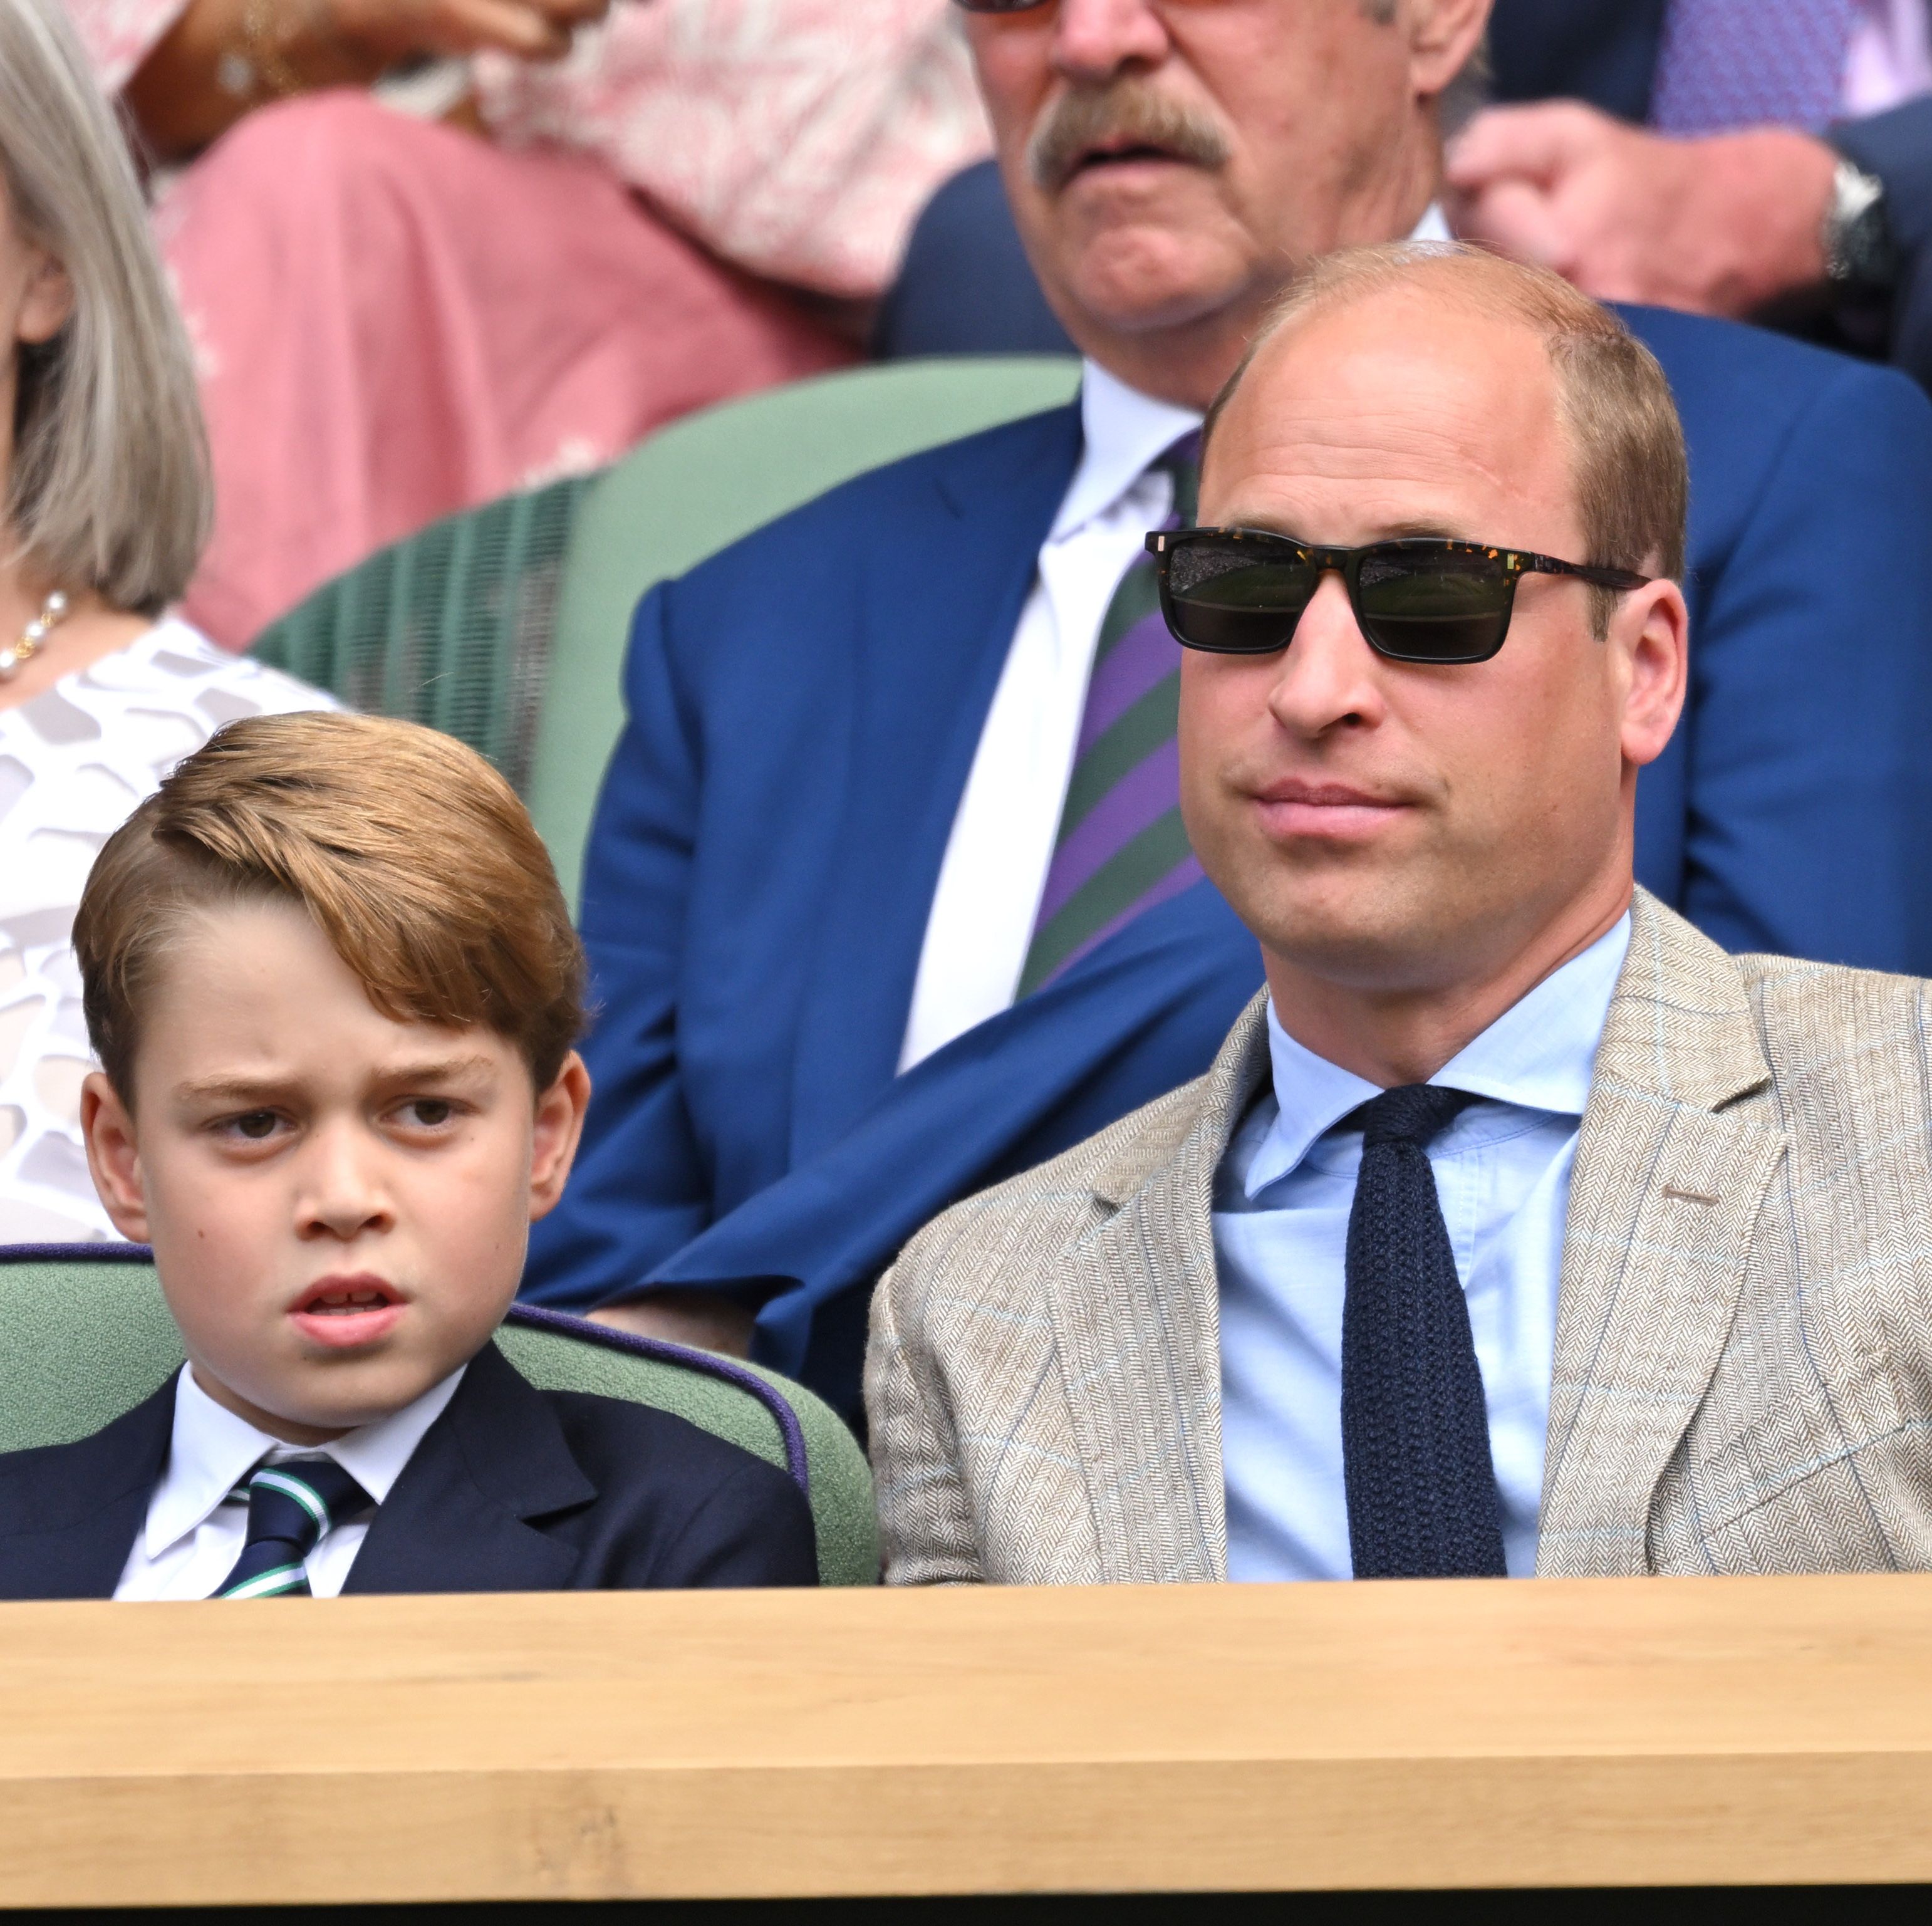 Prince George Will No Longer Be Allowed to Fly with Prince William When He Turns 12